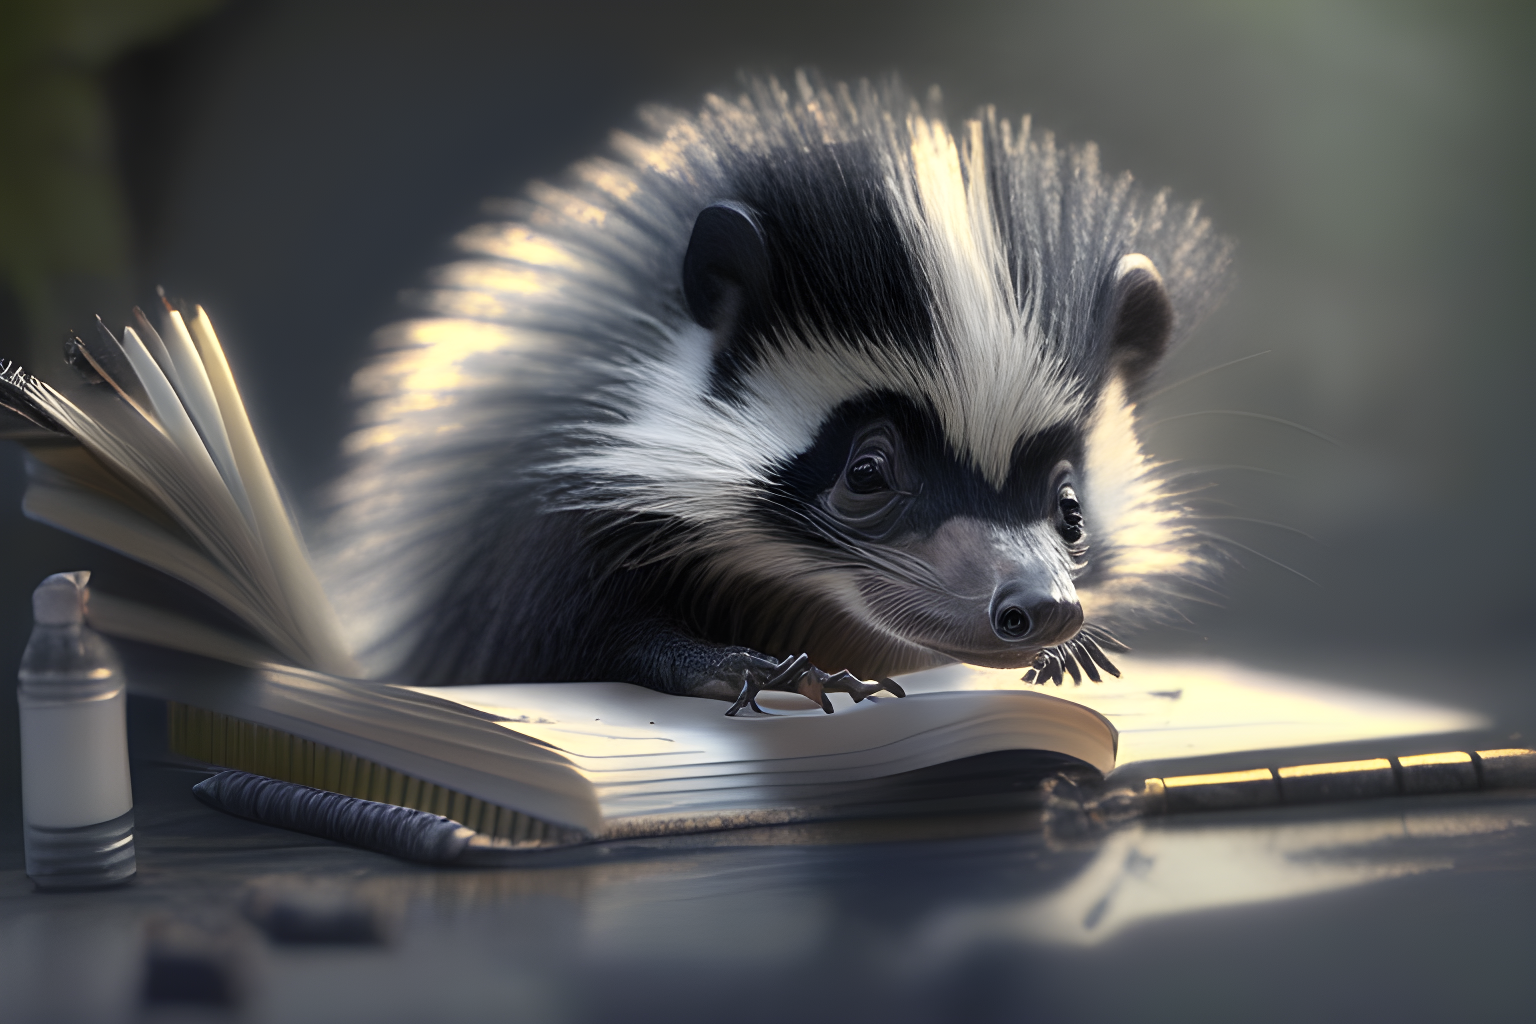 a skunk emerges from a notebook, 4k